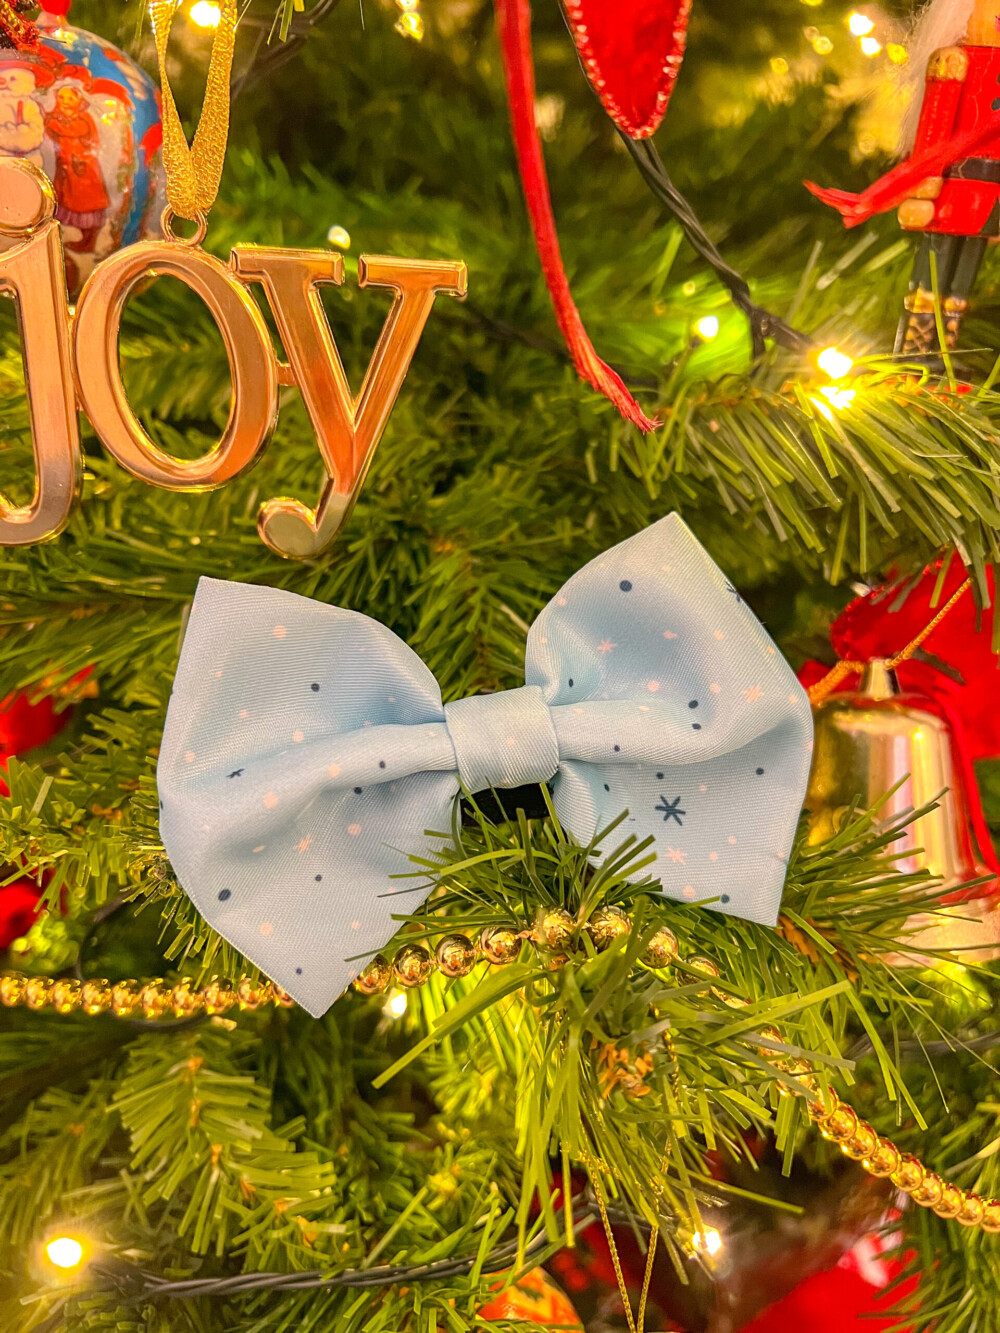 A winter dog bow tie, showing white and blue spots against a pale blue background, placed on a Christmas tree amongst decorations.